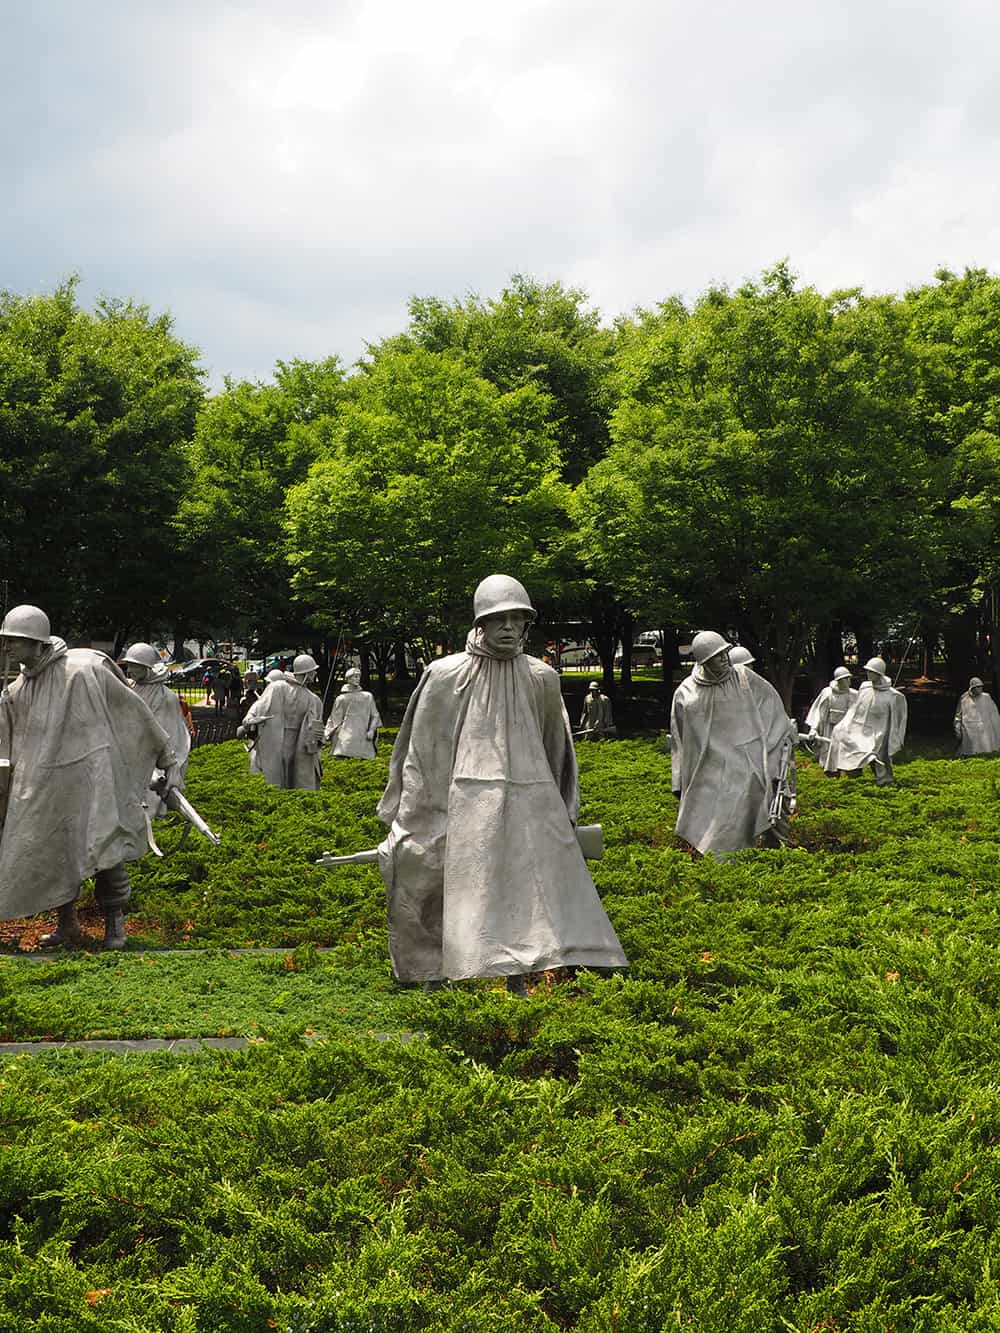 The Korean War memorial in Washington DC| where we have visited in DC + our DC bucket list for the future | via Autumn All Along